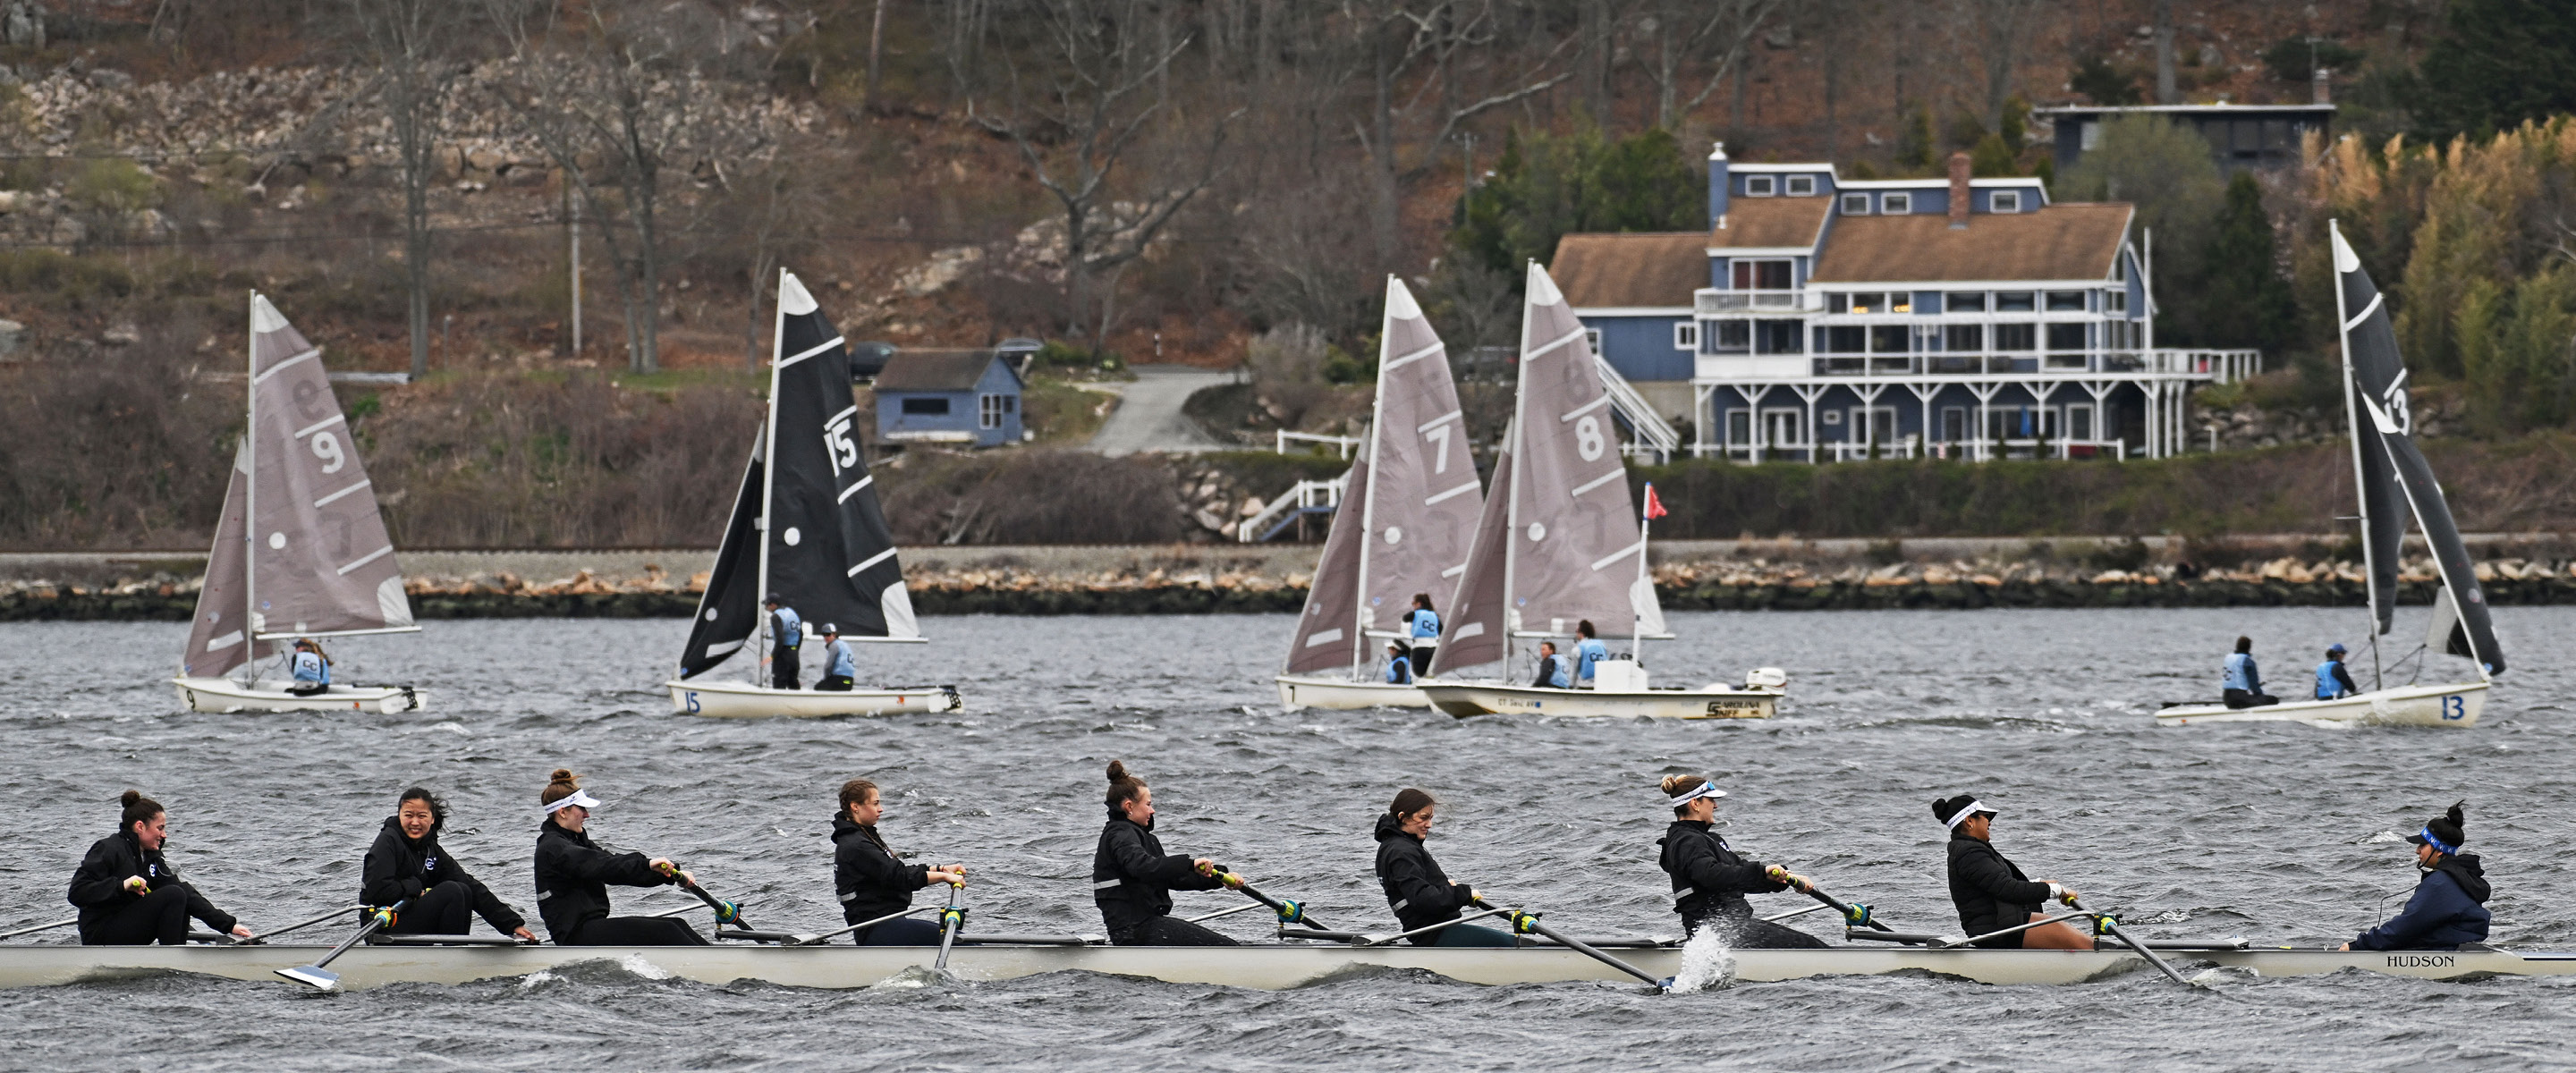 Far shot of crew team rowing in front of CC sailboats